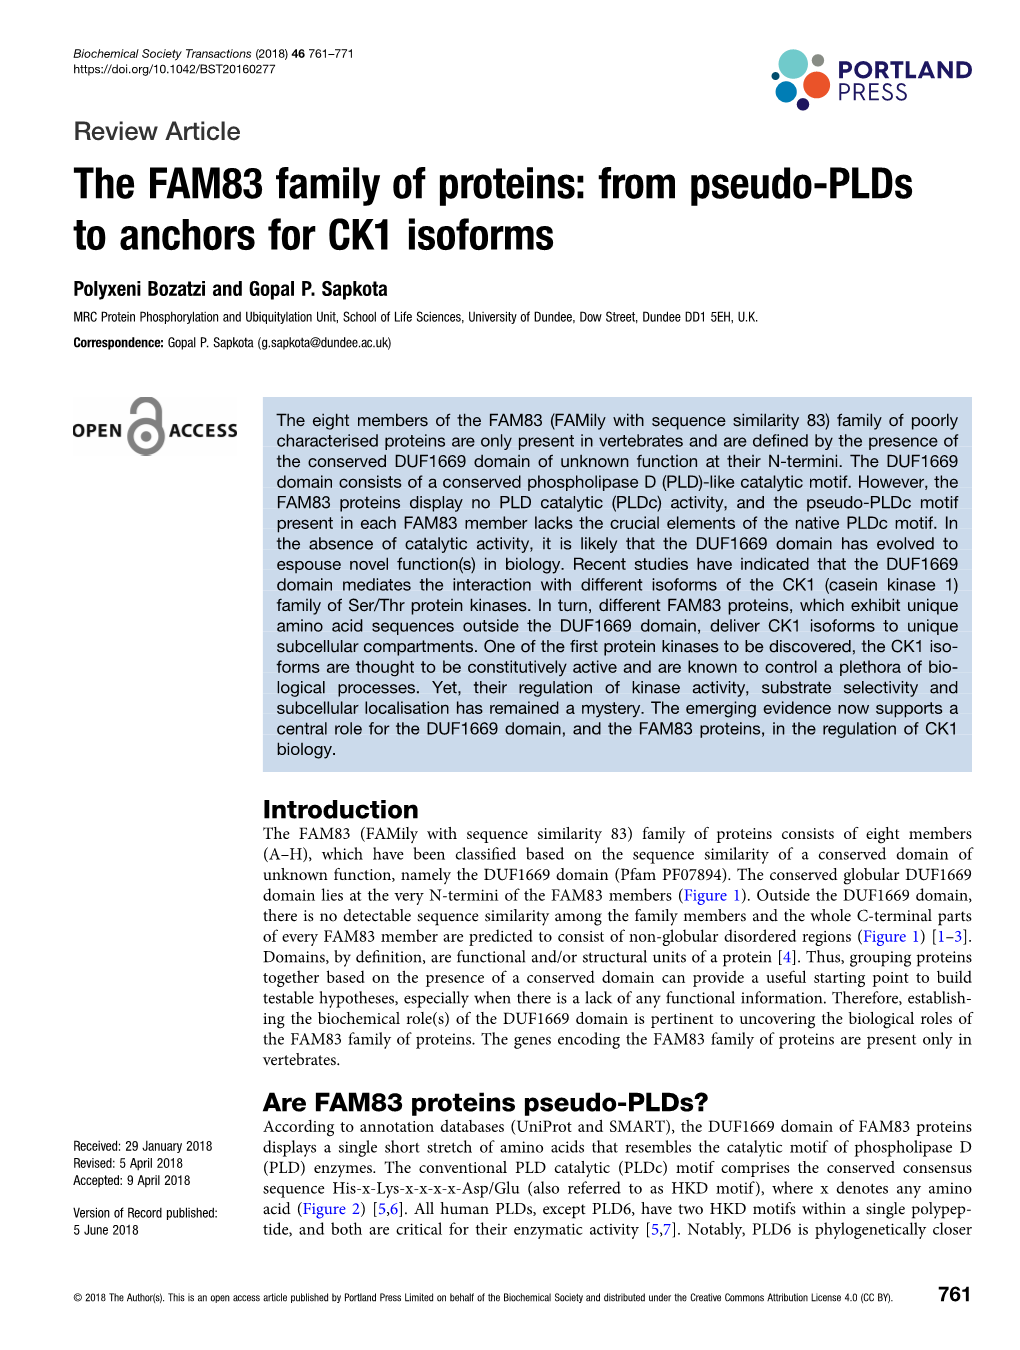 From Pseudo-Plds to Anchors for CK1 Isoforms